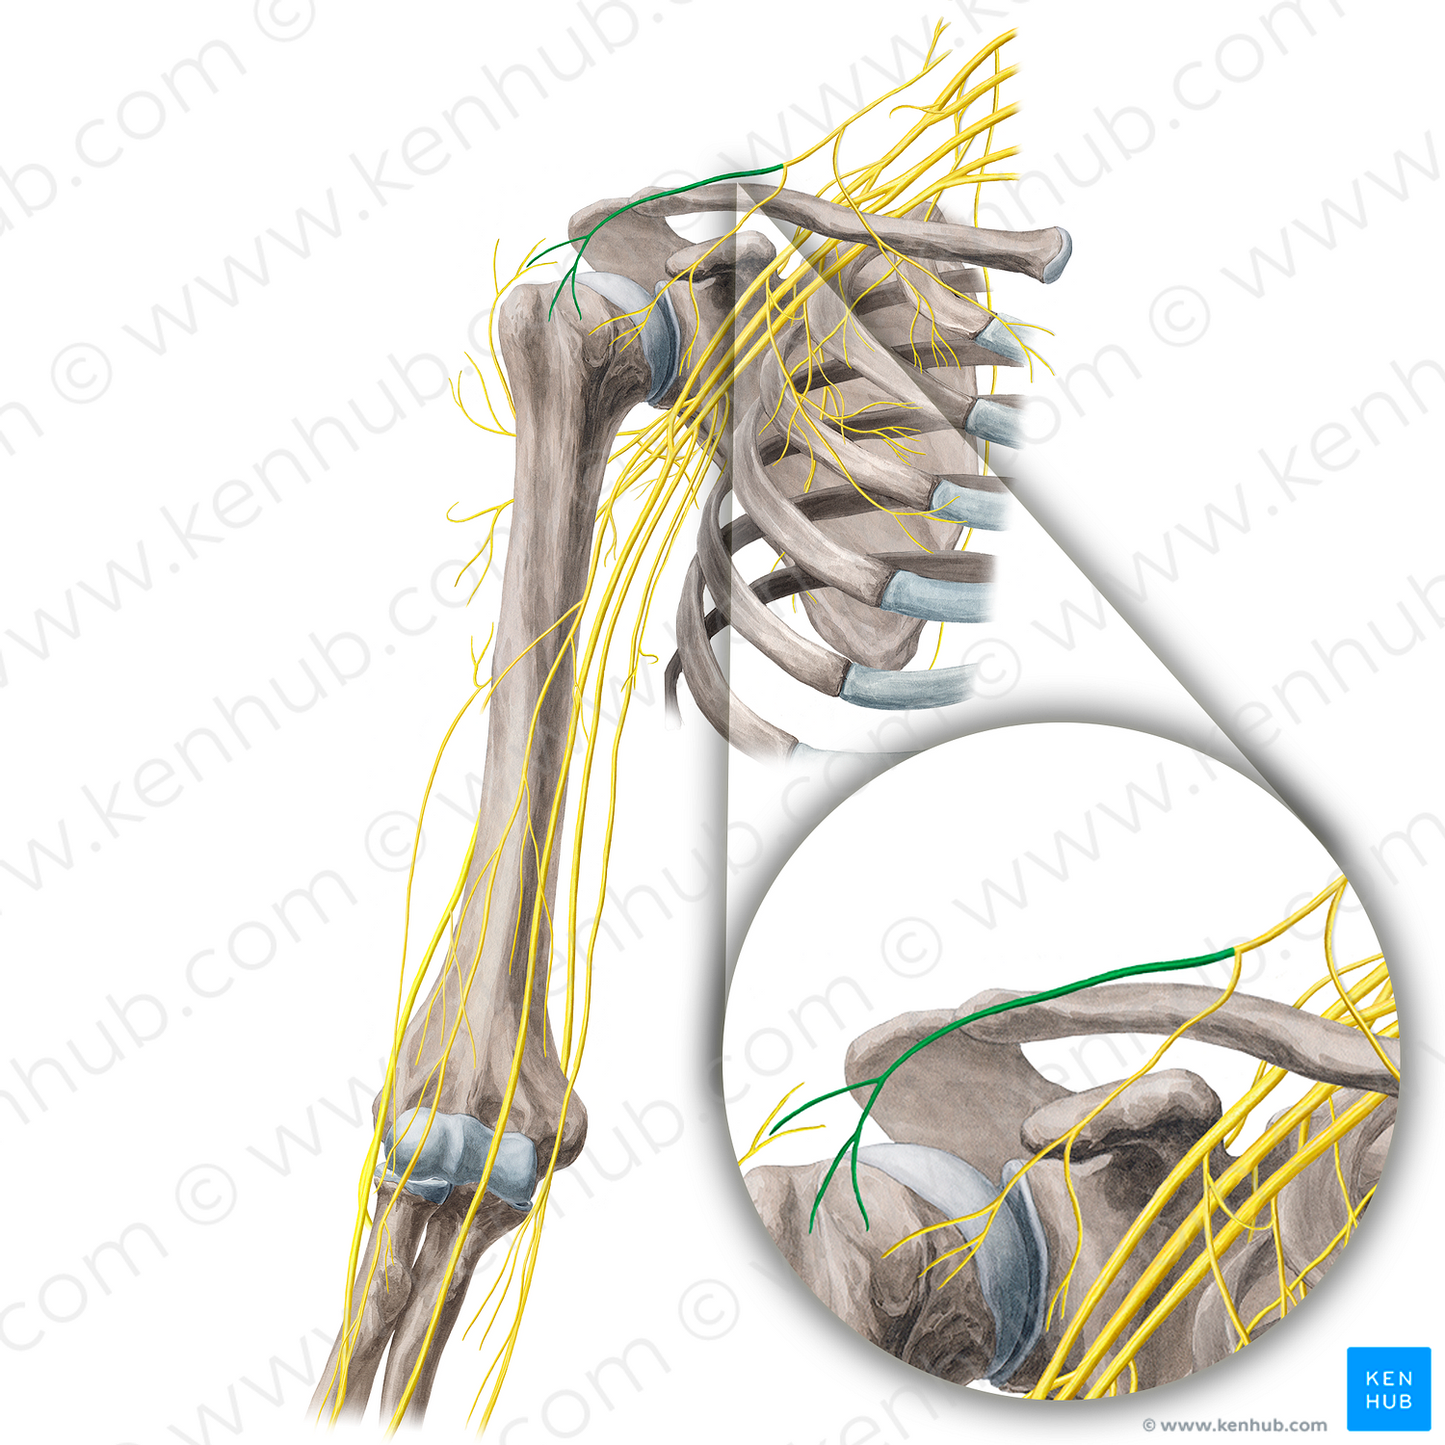 Lateral supraclavicular nerves (#21682)